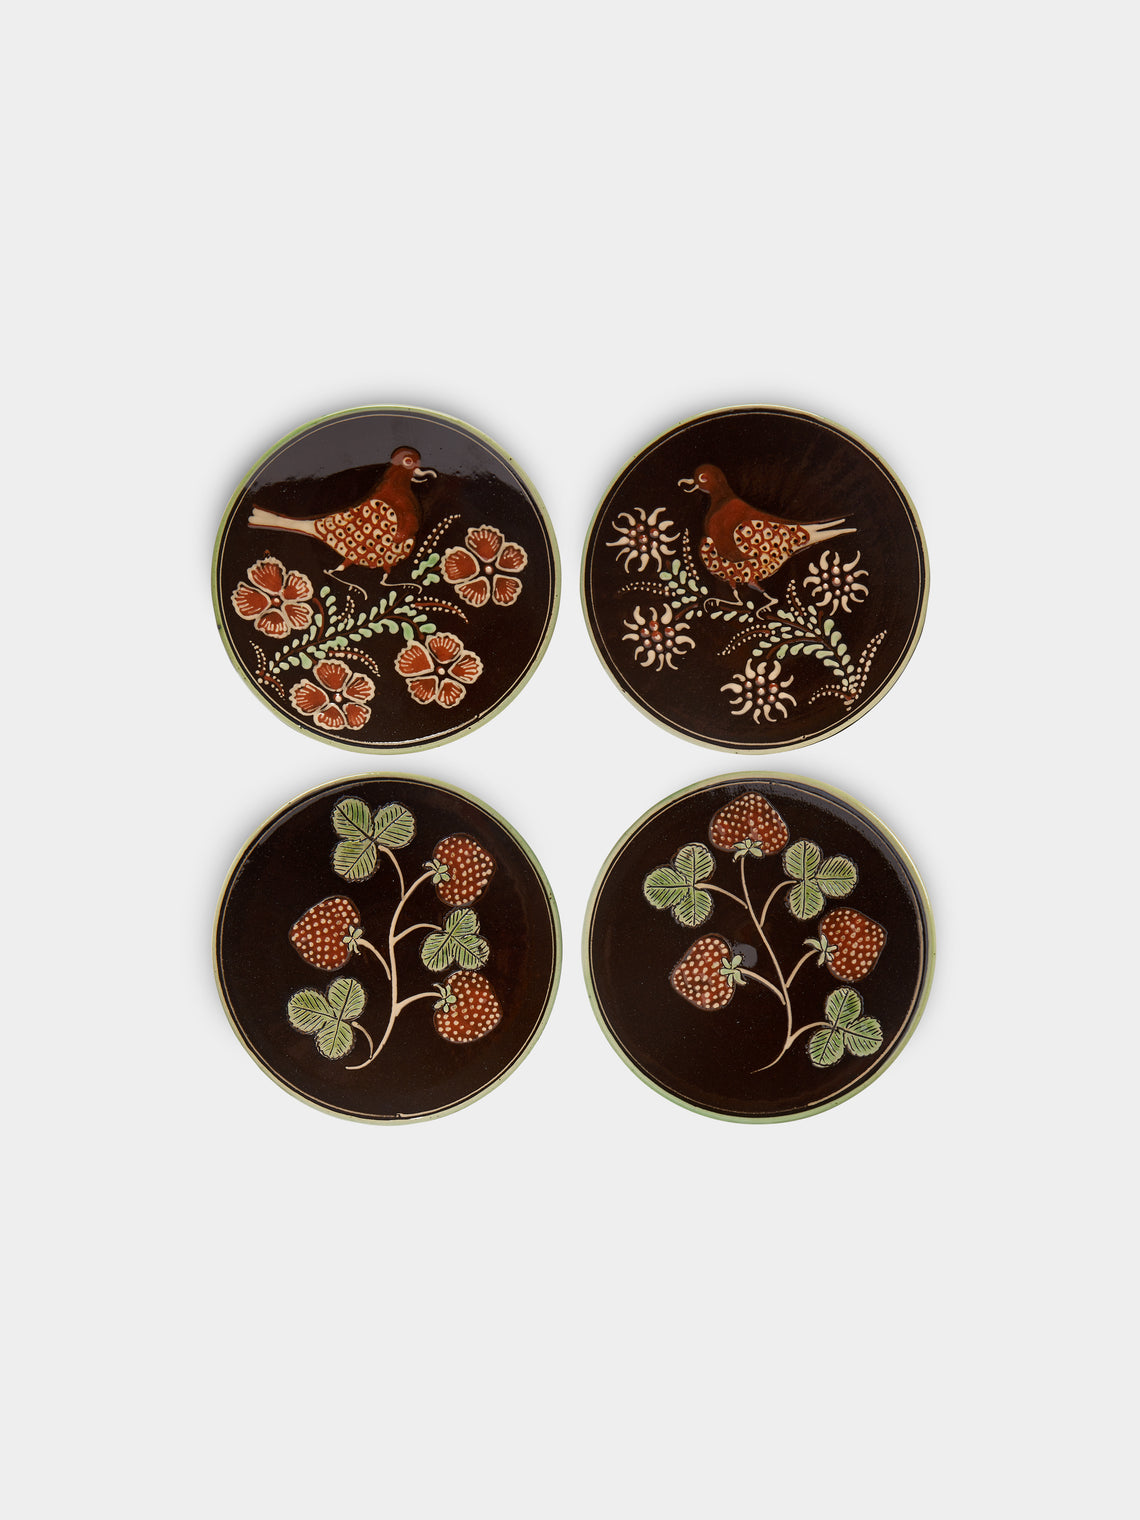 Poterie d’Évires - Birds and Berries Hand-Painted Ceramic Dessert Plates (Set of 4) -  - ABASK - 